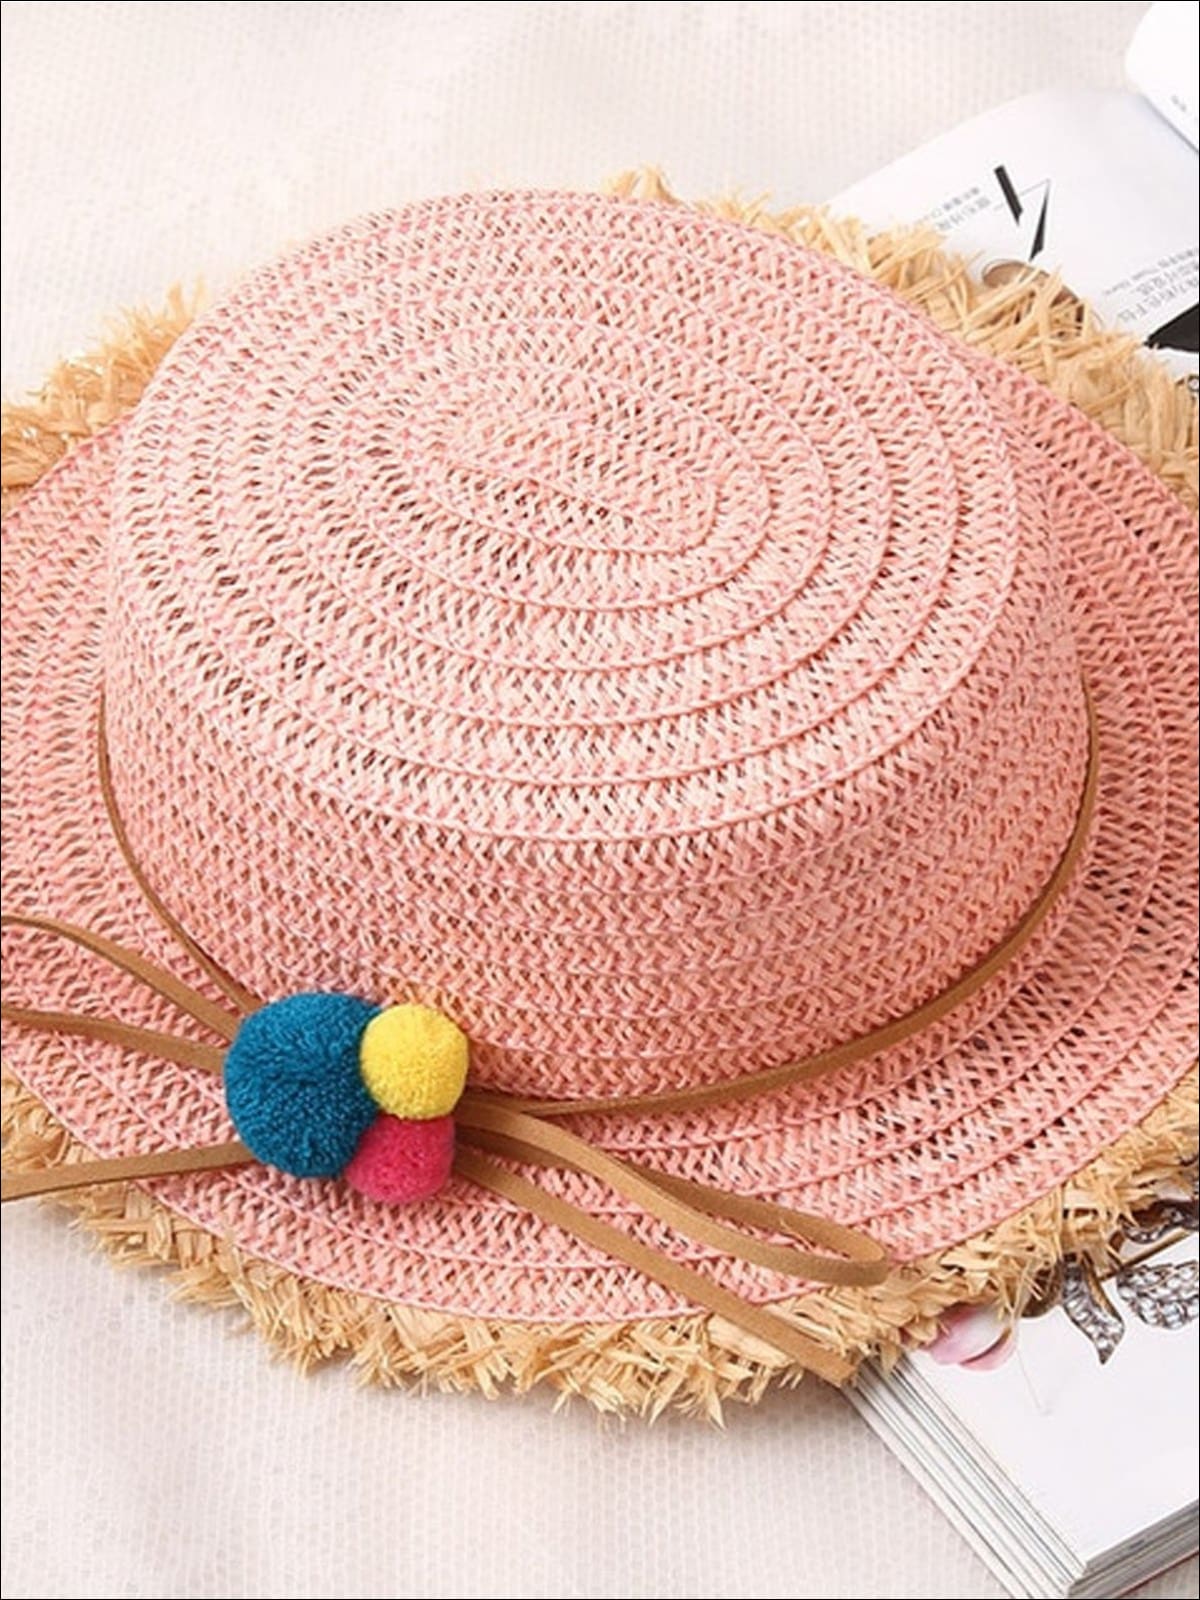 Girls Straw Hat with Leather Strap and Pom Poms - Pink - Girls Hats